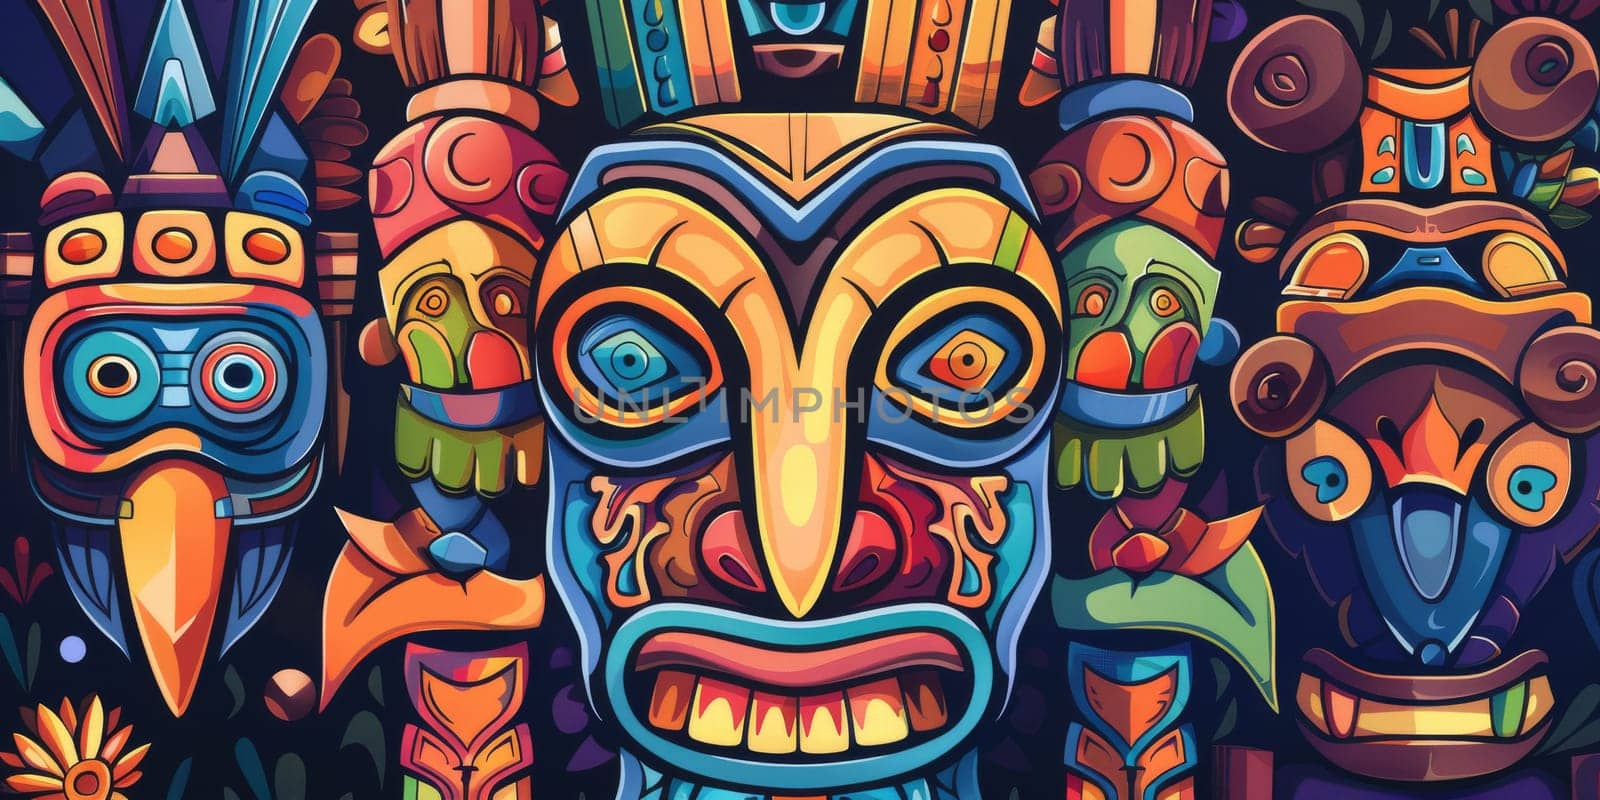 A lot of a colorful shamanic totem as background or texture, shaman concept